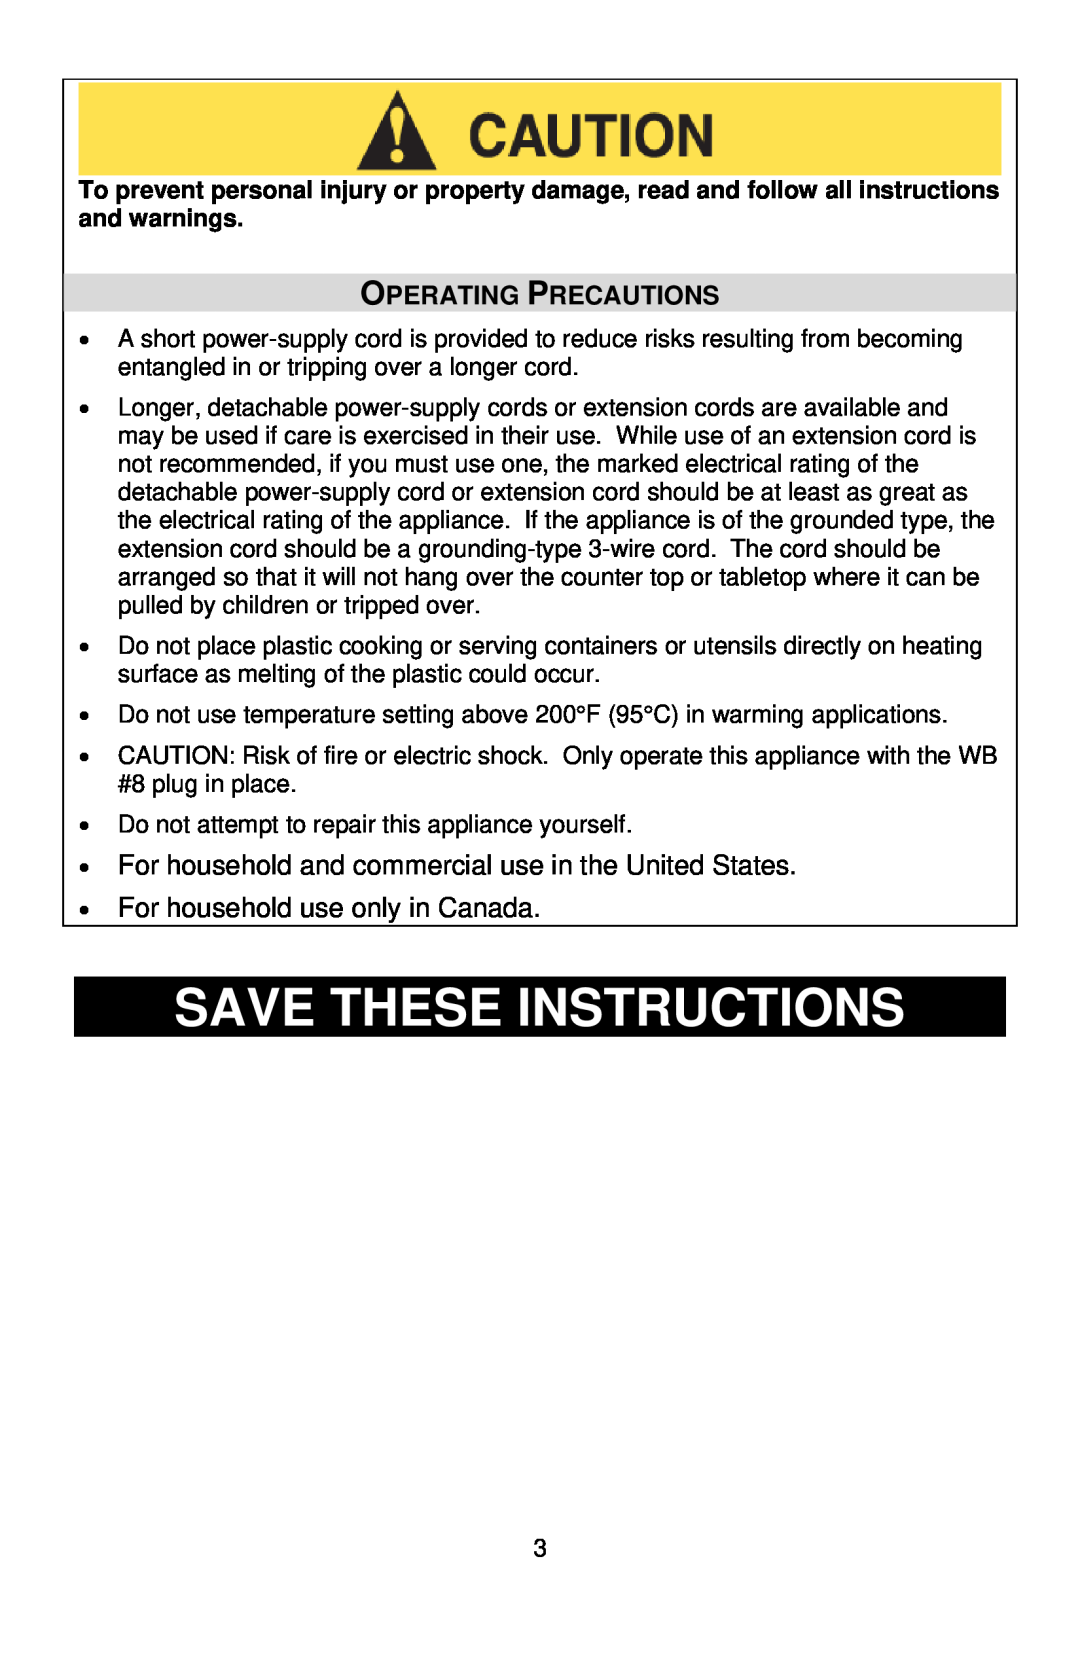 West Bend L5749A instruction manual Save These Instructions, Operating Precautions, For household use only in Canada 